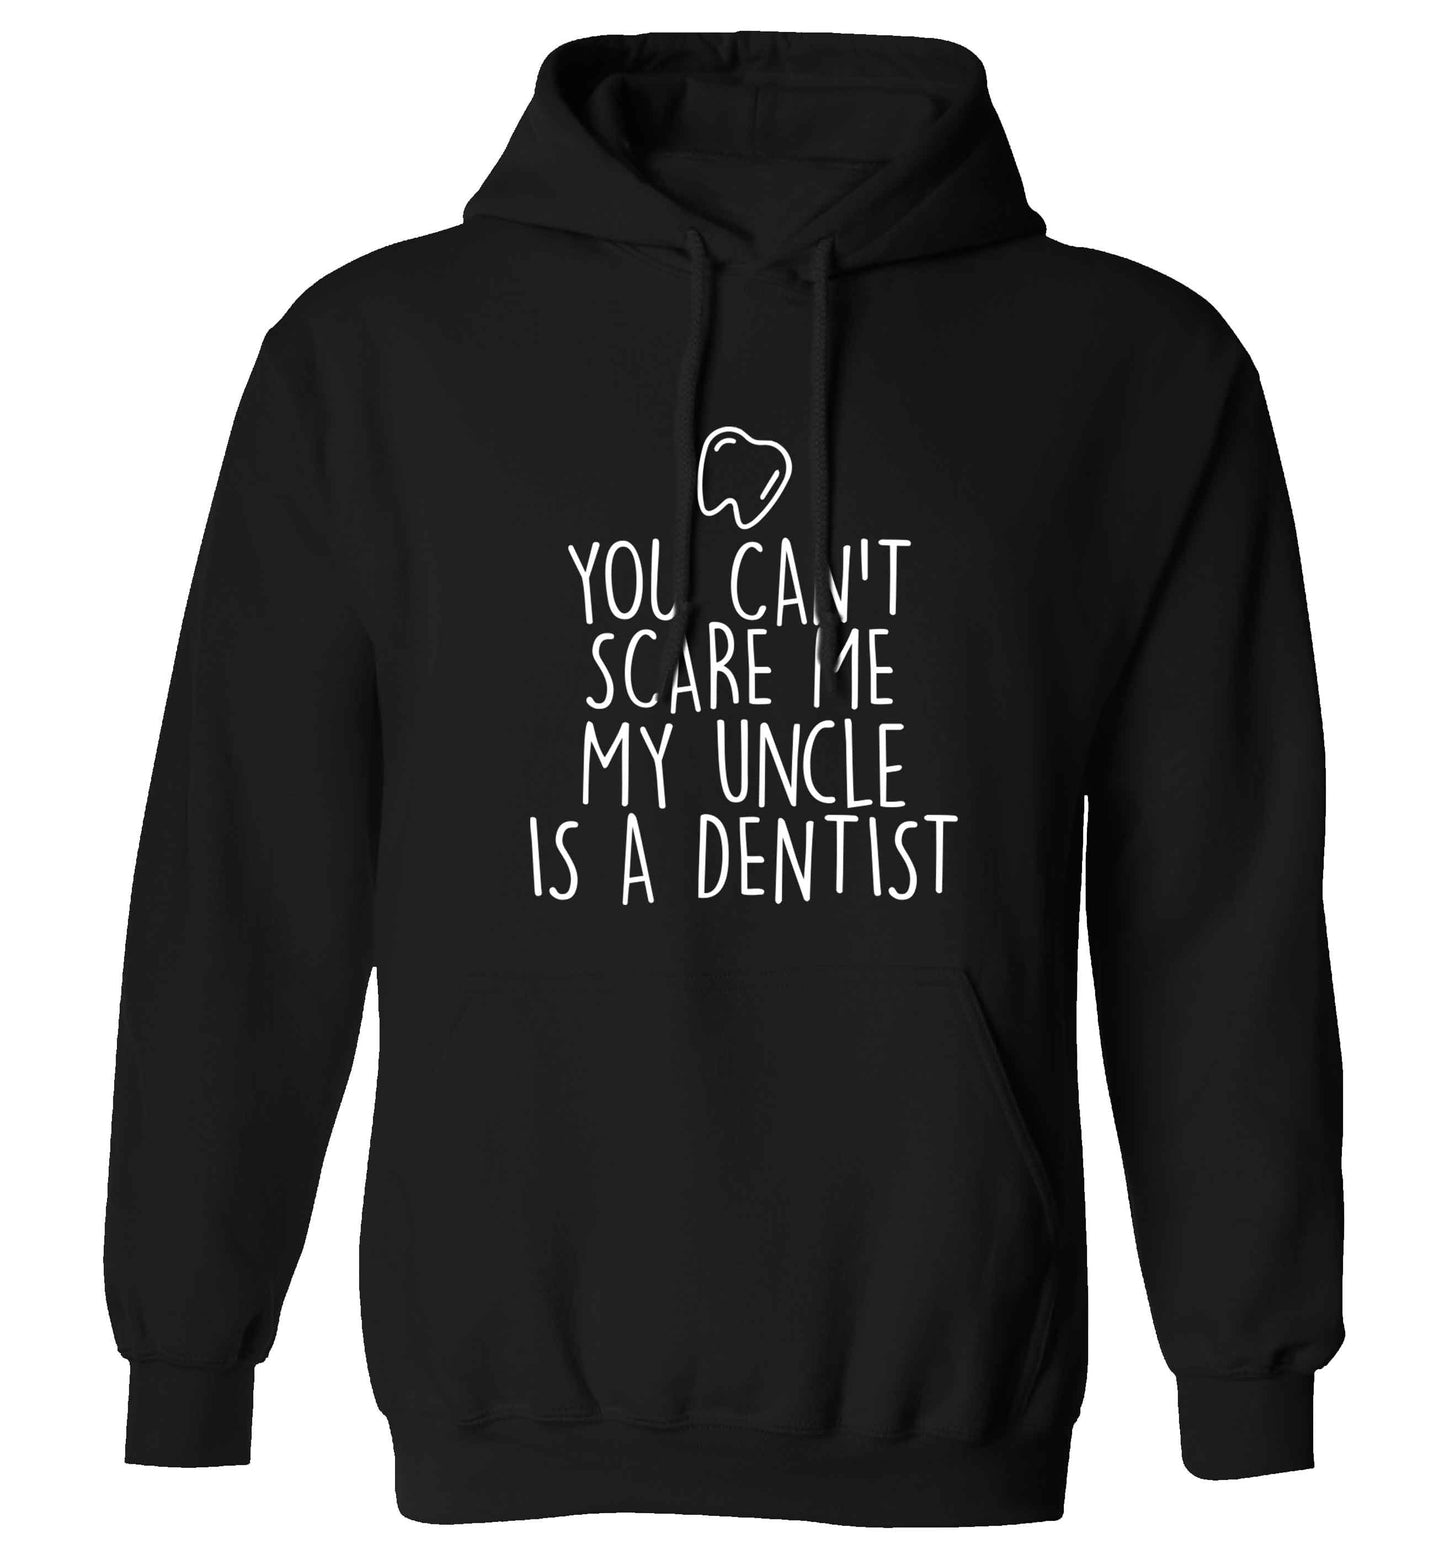 You can't scare me my uncle is a dentist adults unisex black hoodie 2XL